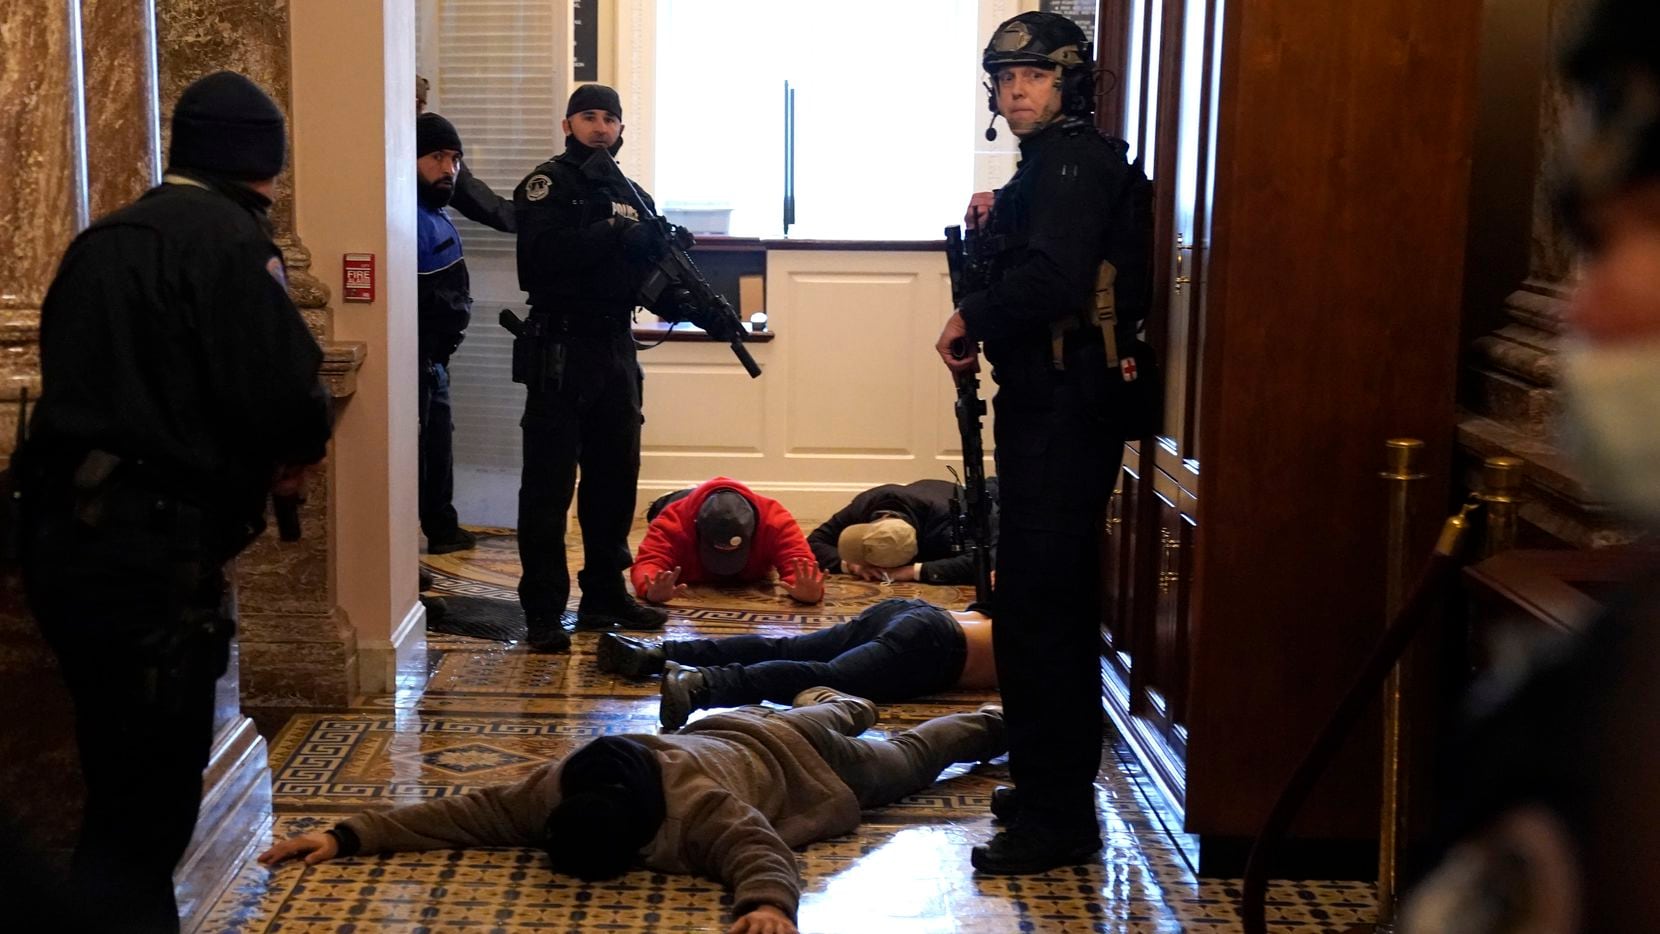 WASHINGTON, DC - JANUARY 06: U.S. Capitol Police stand detain protesters outside of the...